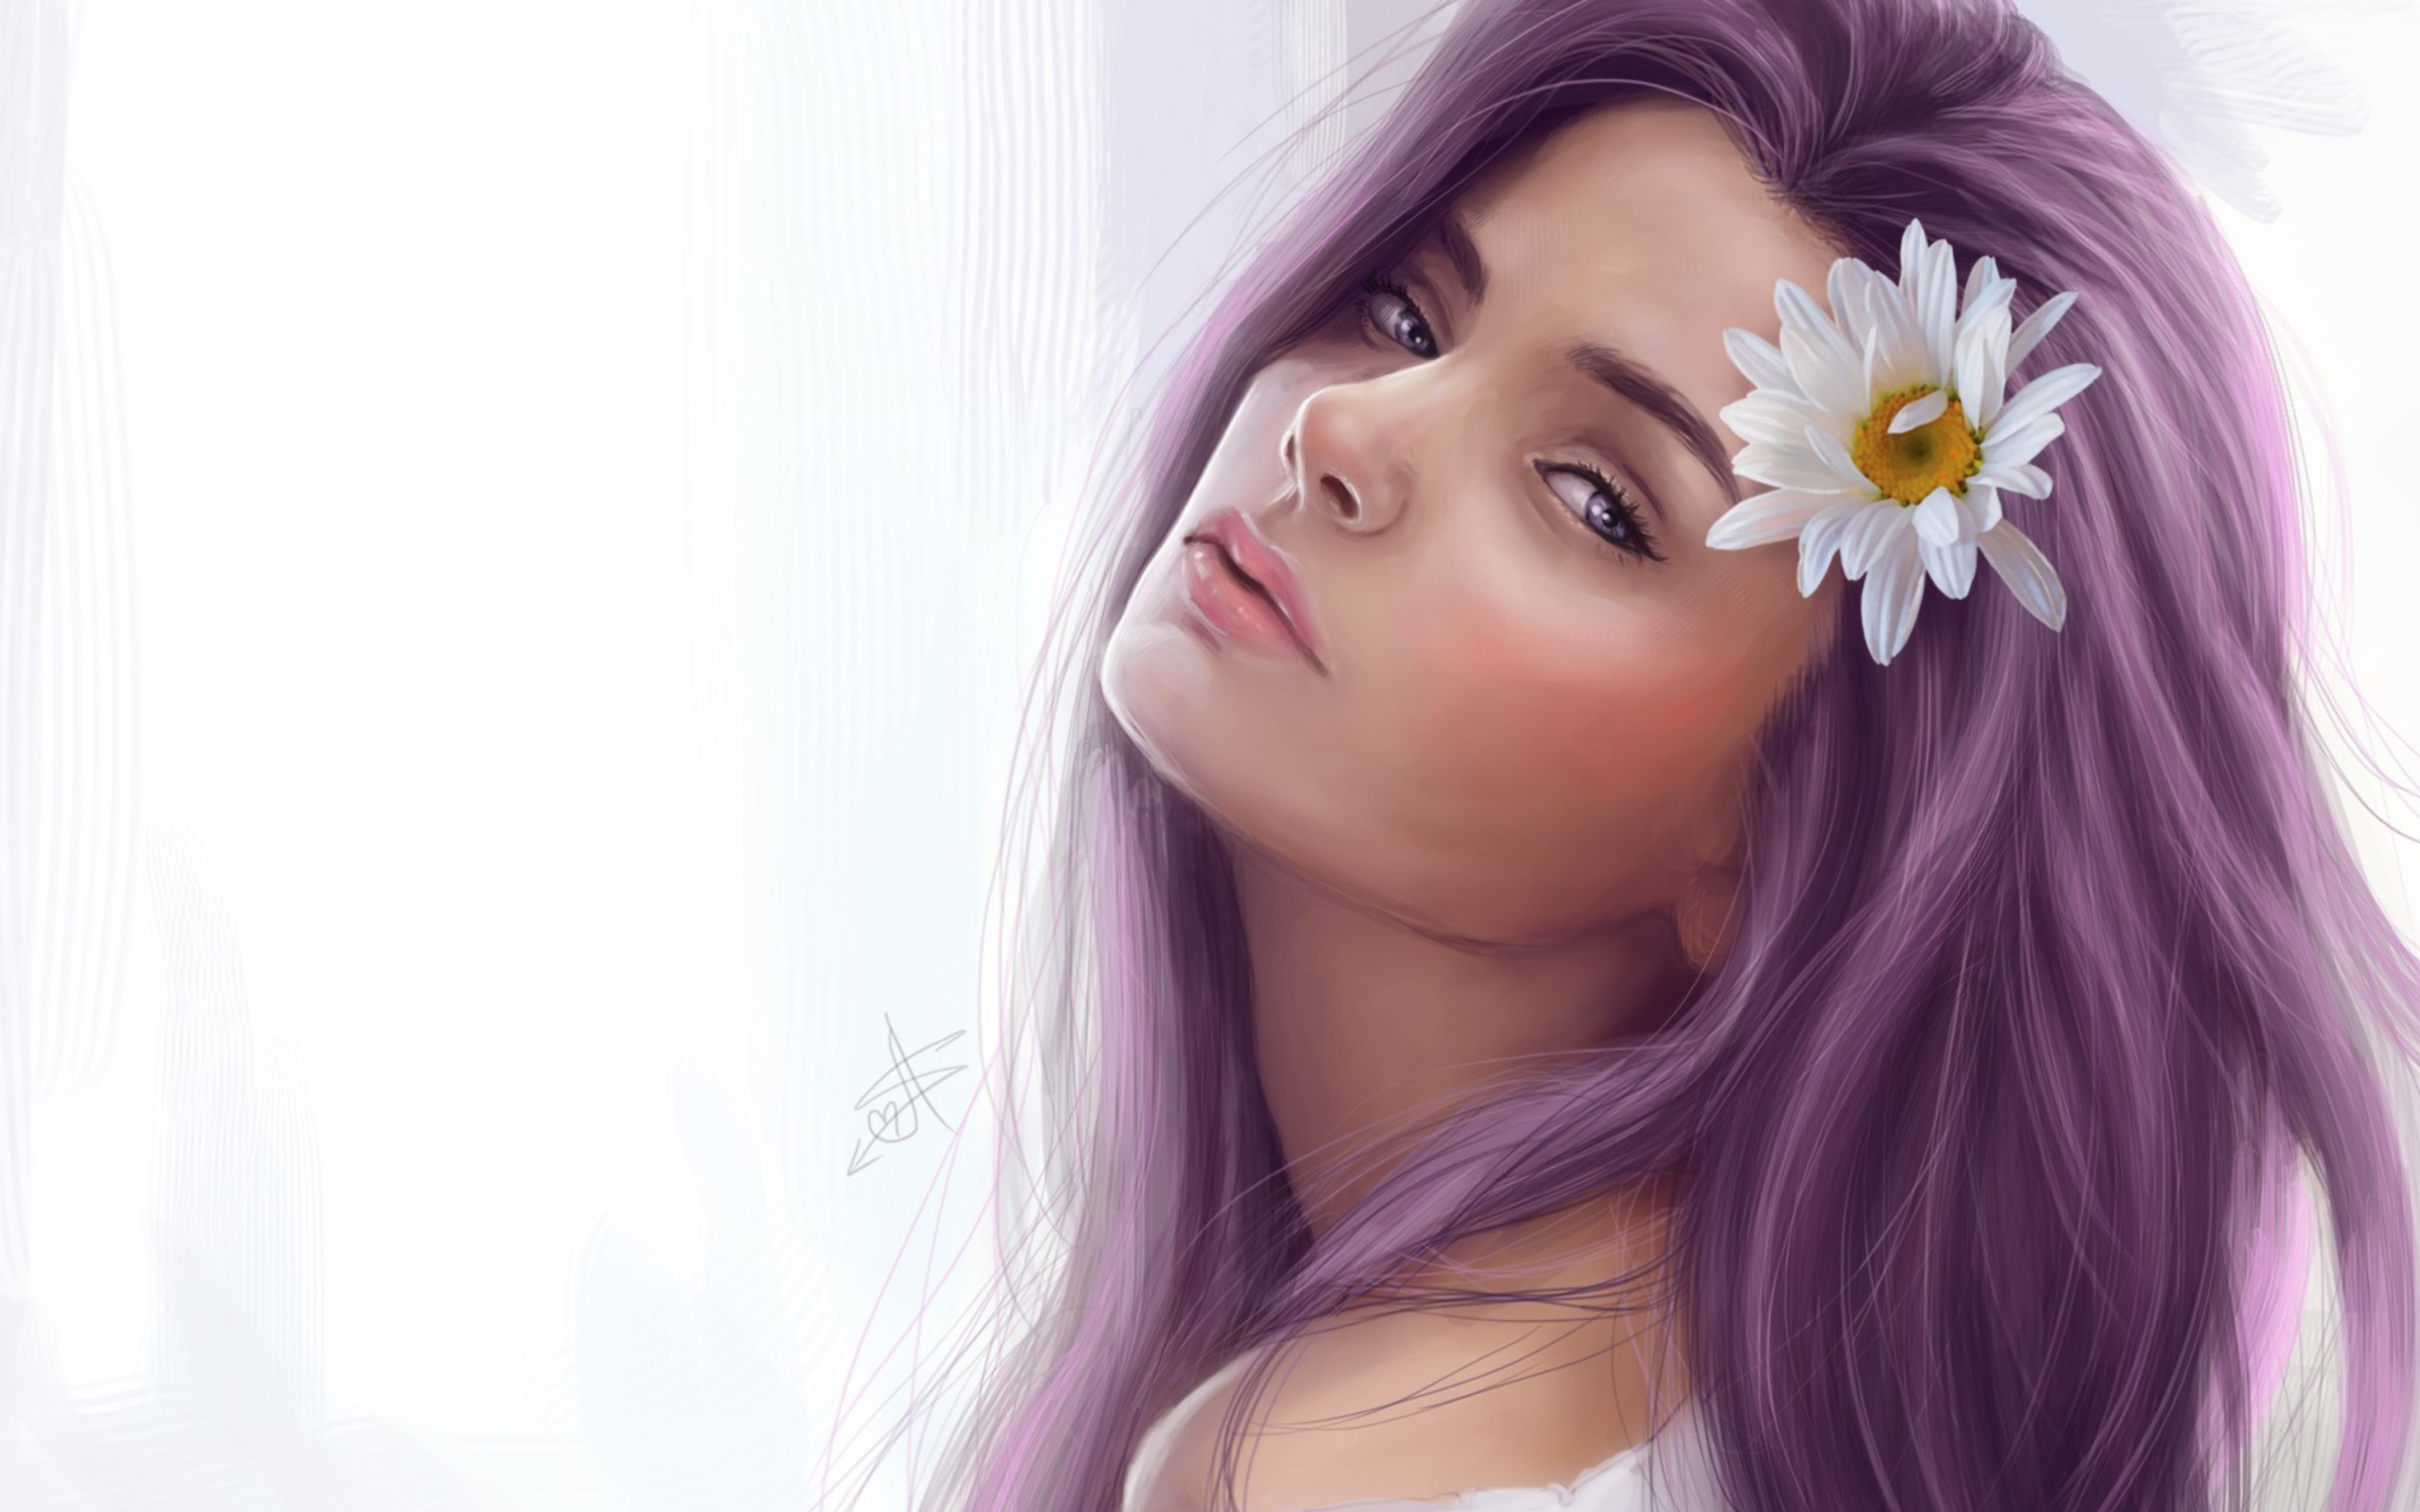 Das Girl With Purple Hair Painting Wallpaper 2560x1600